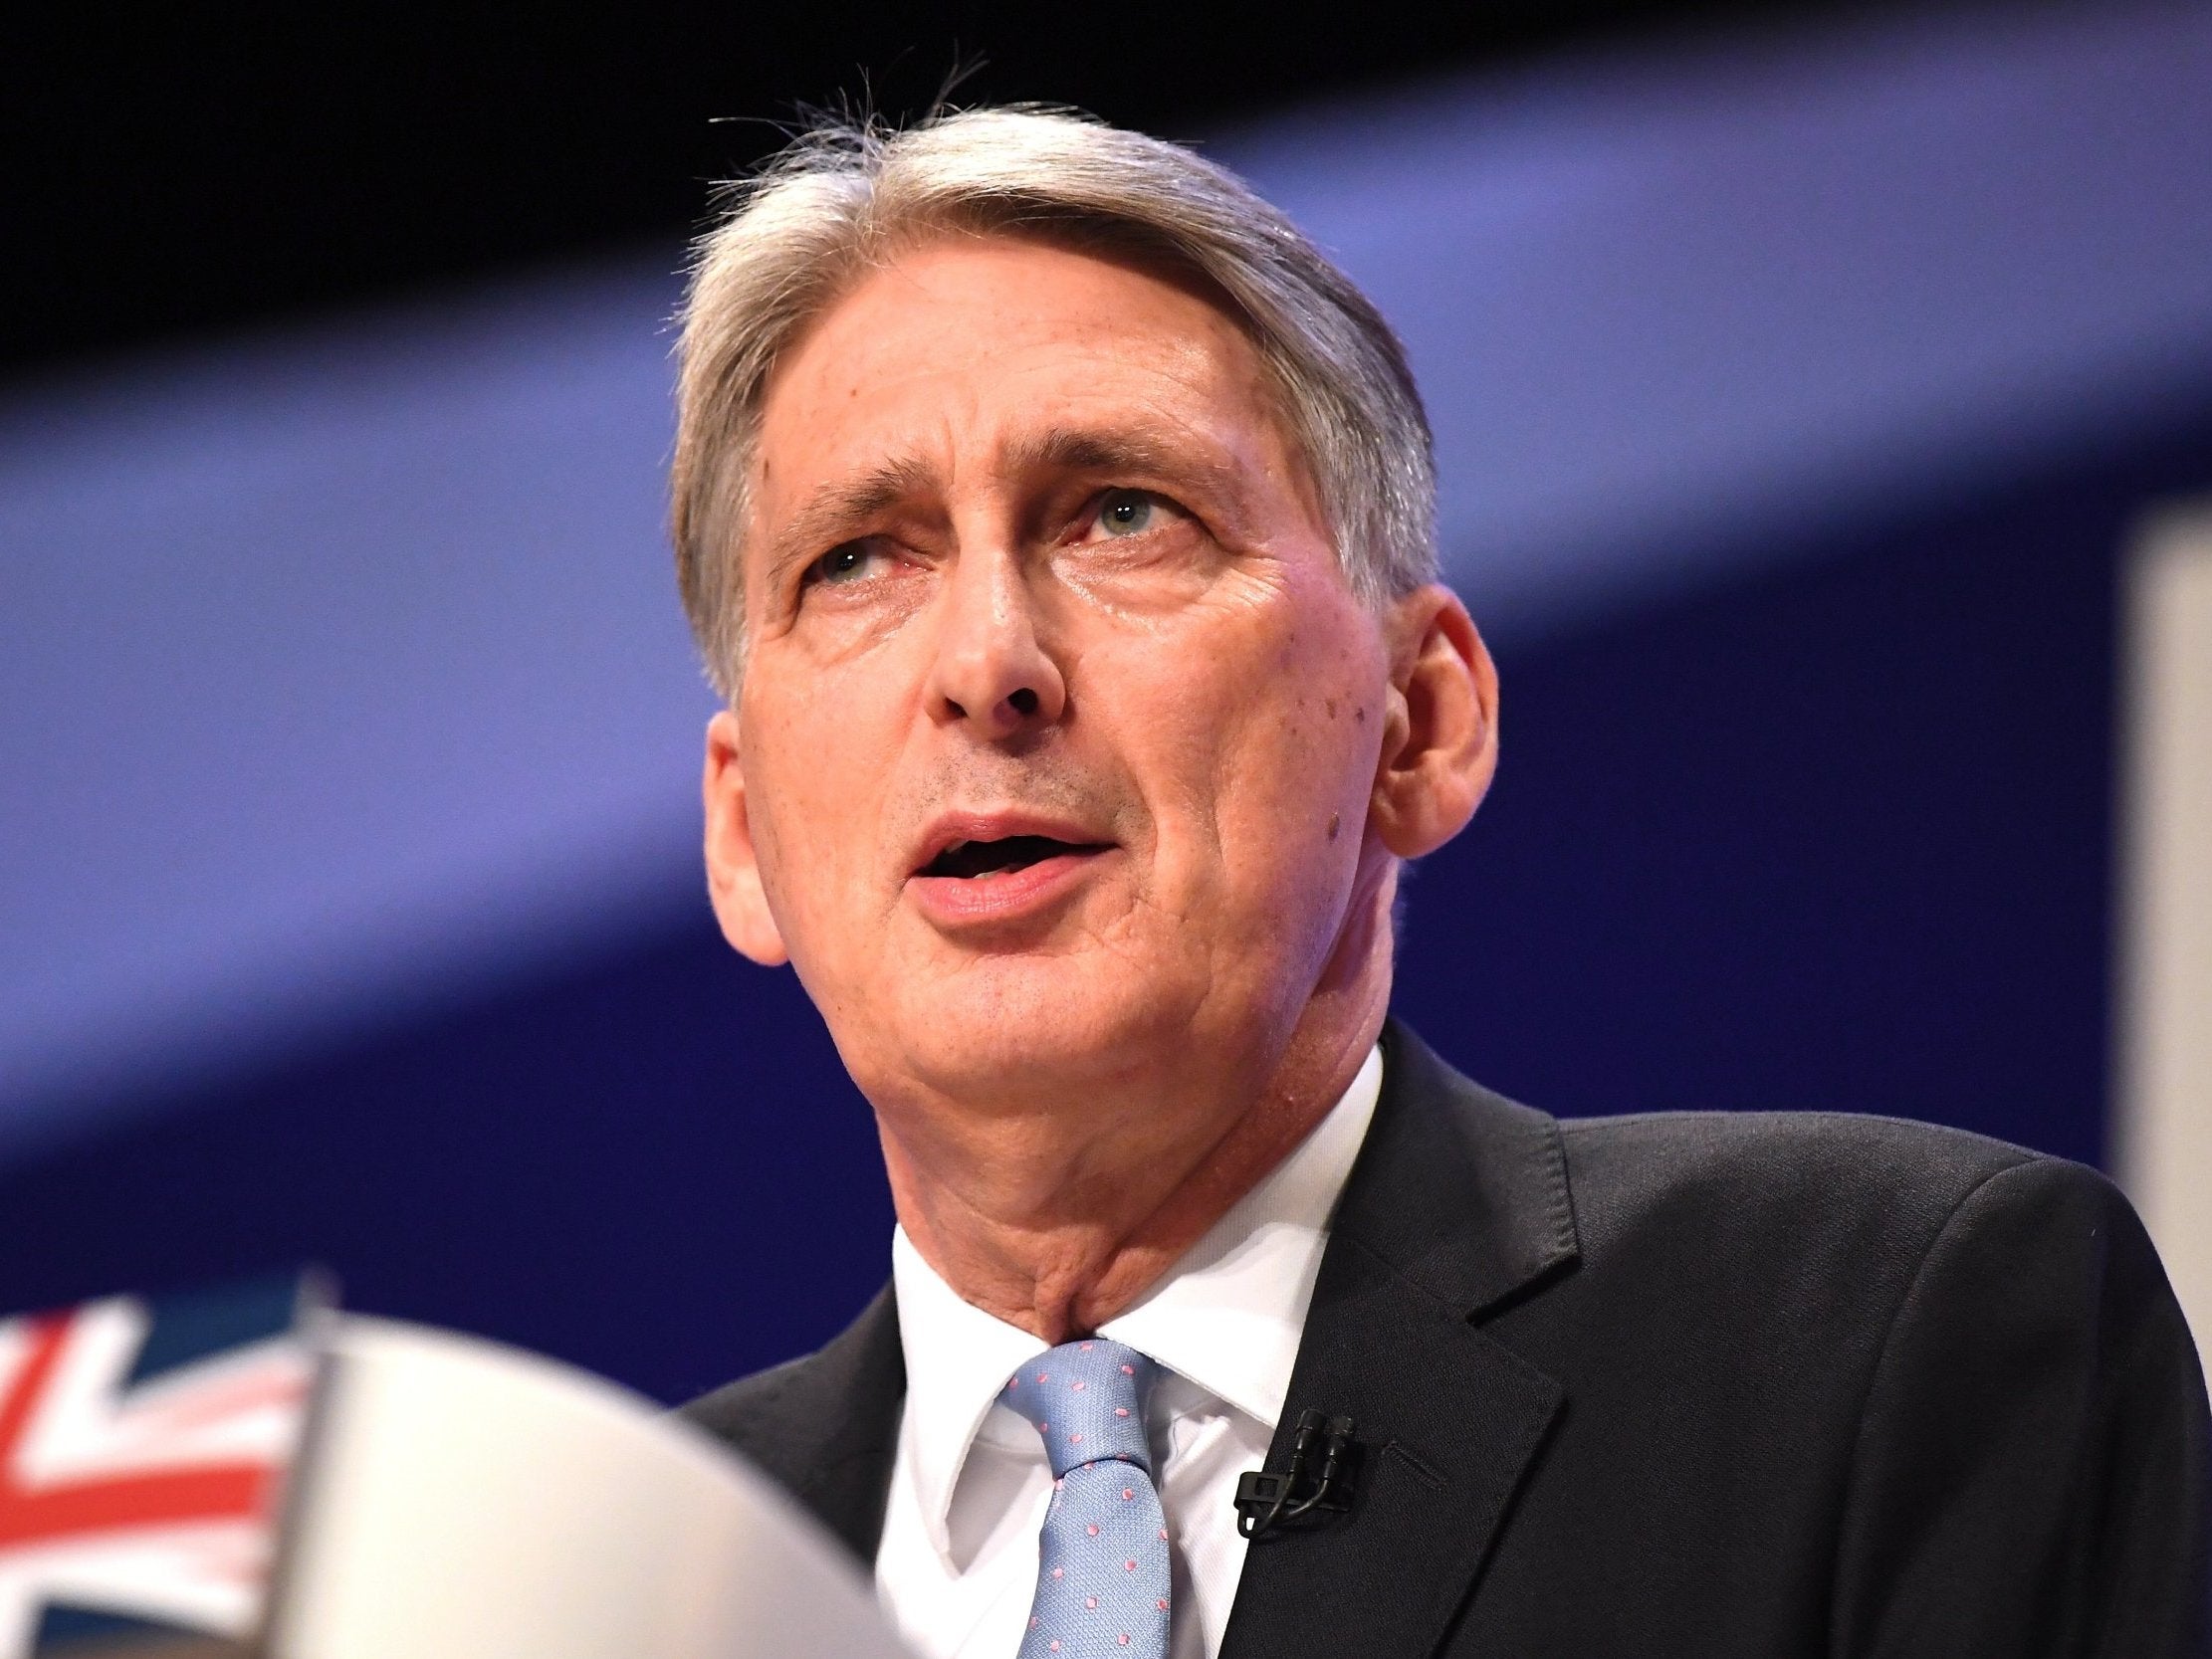 Philip Hammond said a Brexit deal would allow him to release some of the funds set aside to prepare for a no-deal outcome